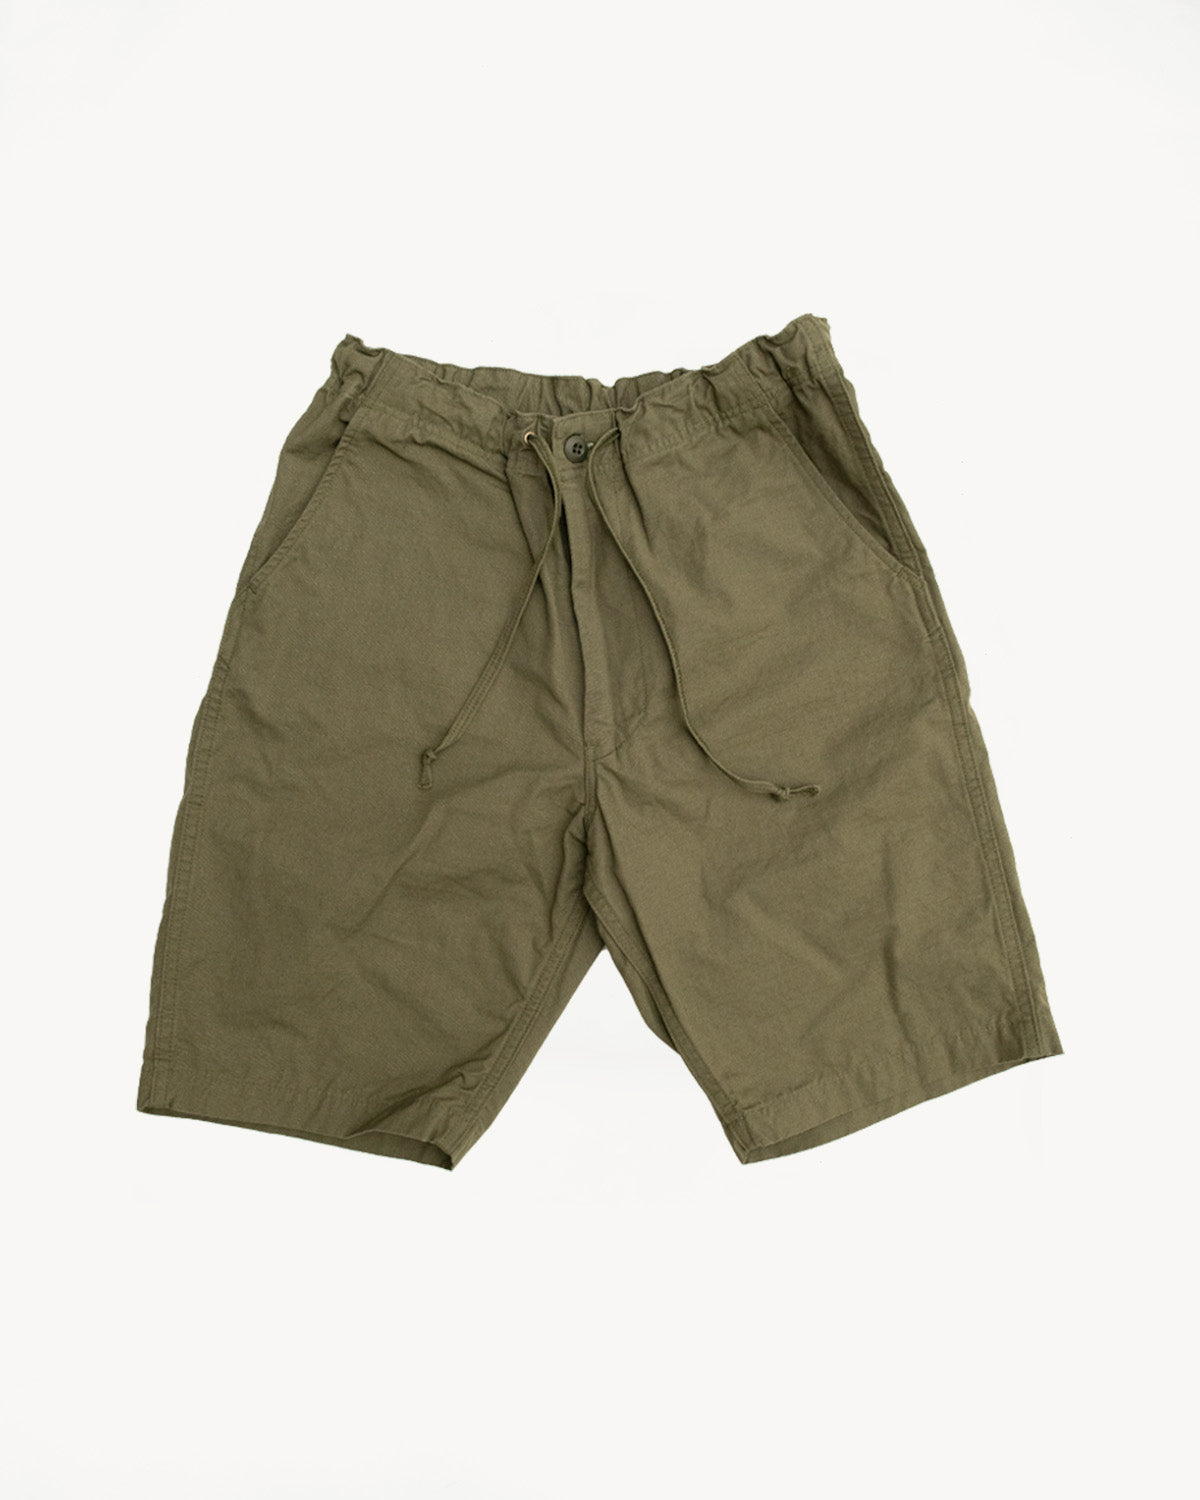 03-7022-76 - New Yorker Shorts - Army Ripstop